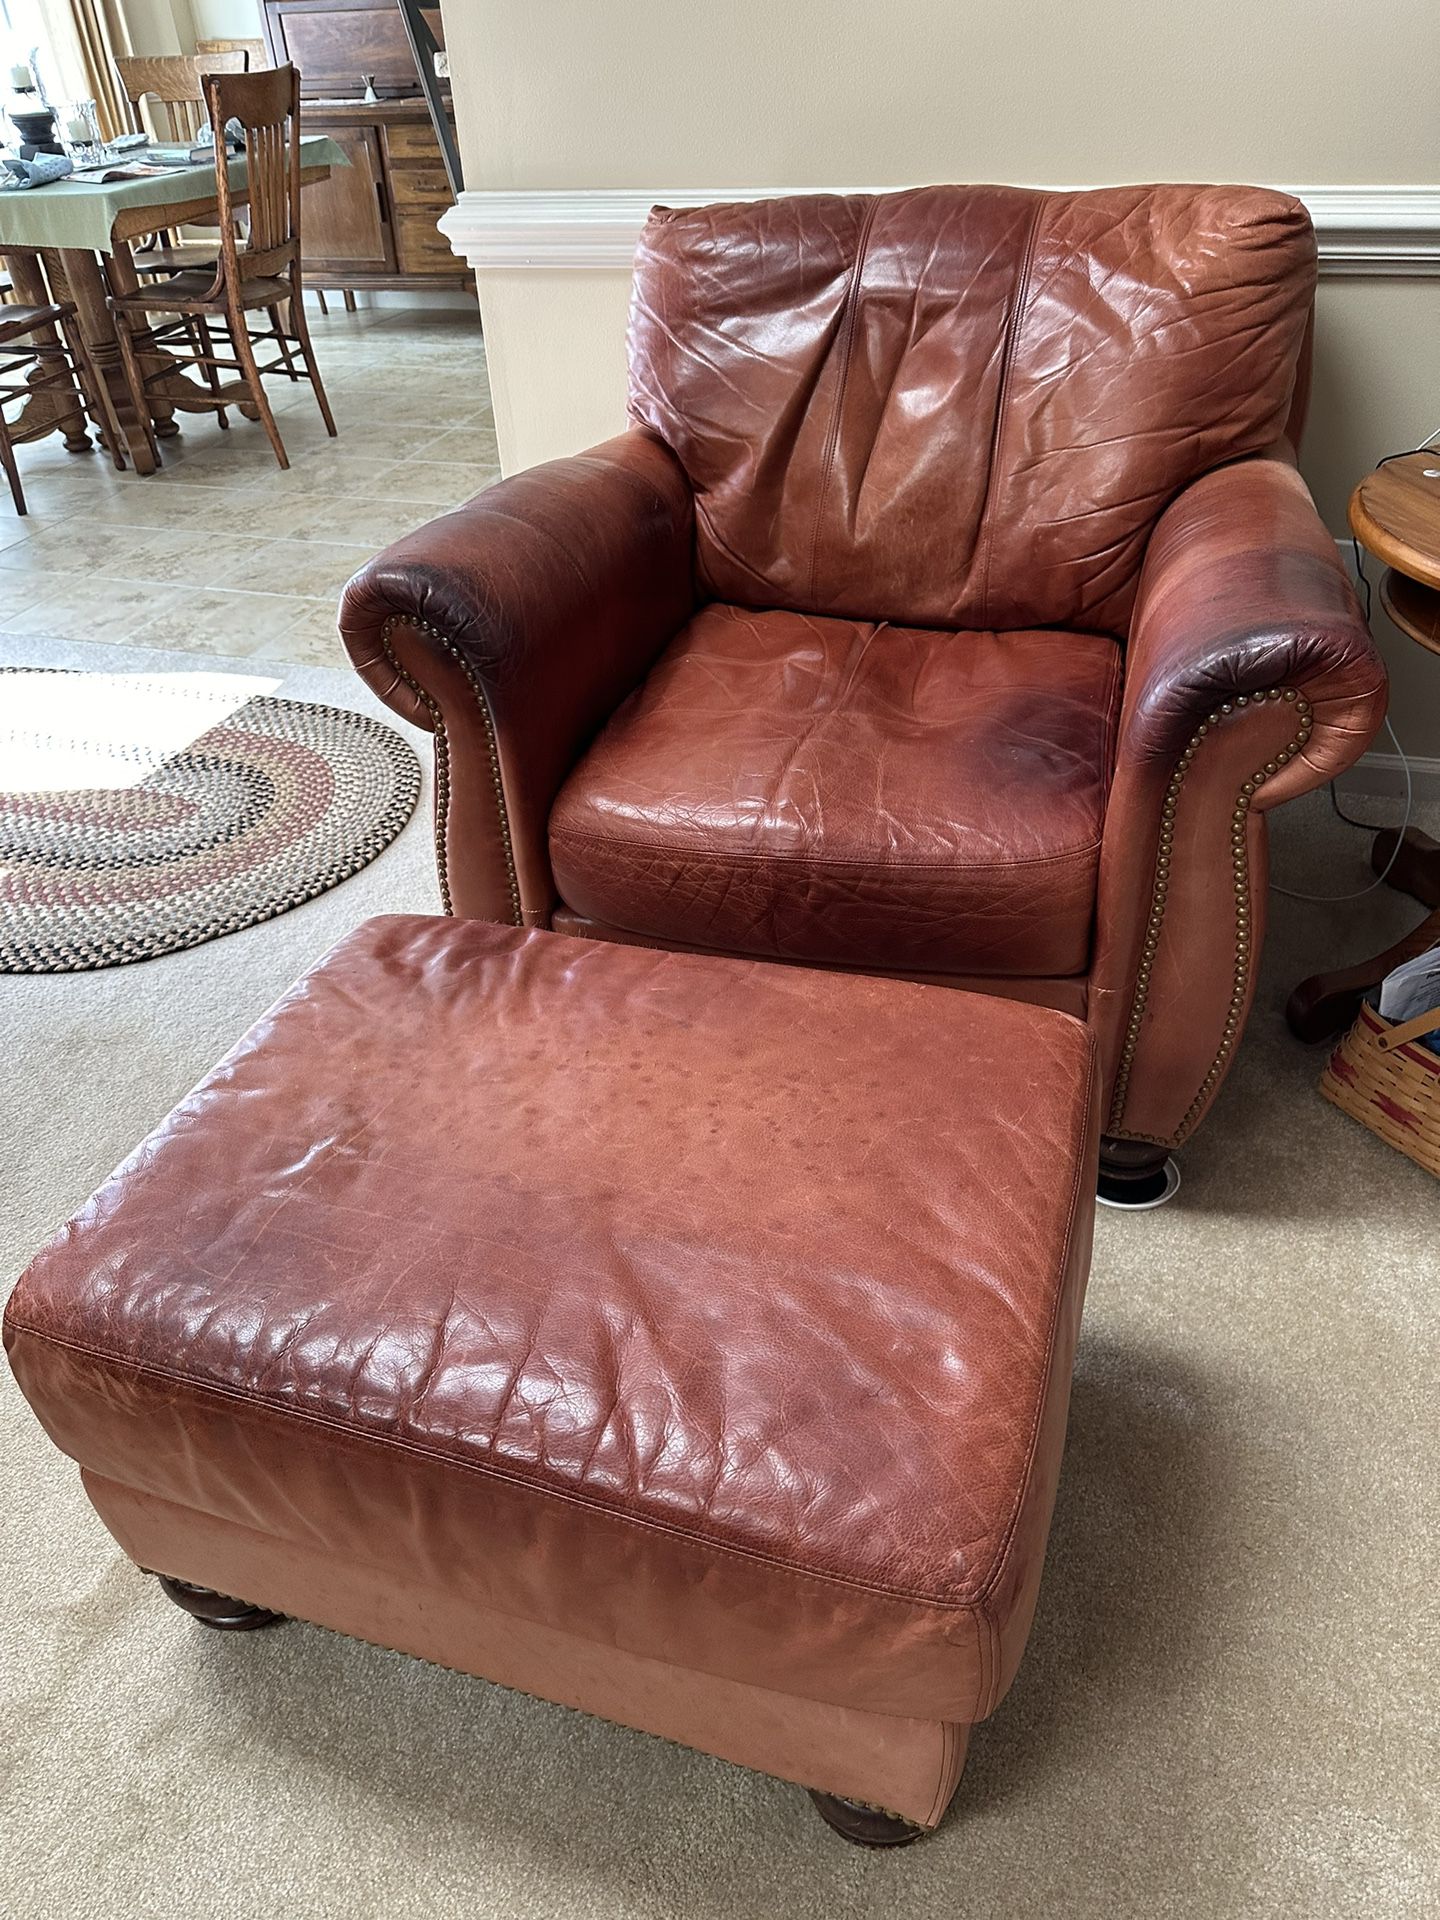 Leather Furniture - Sofa, Chair and Ottoman